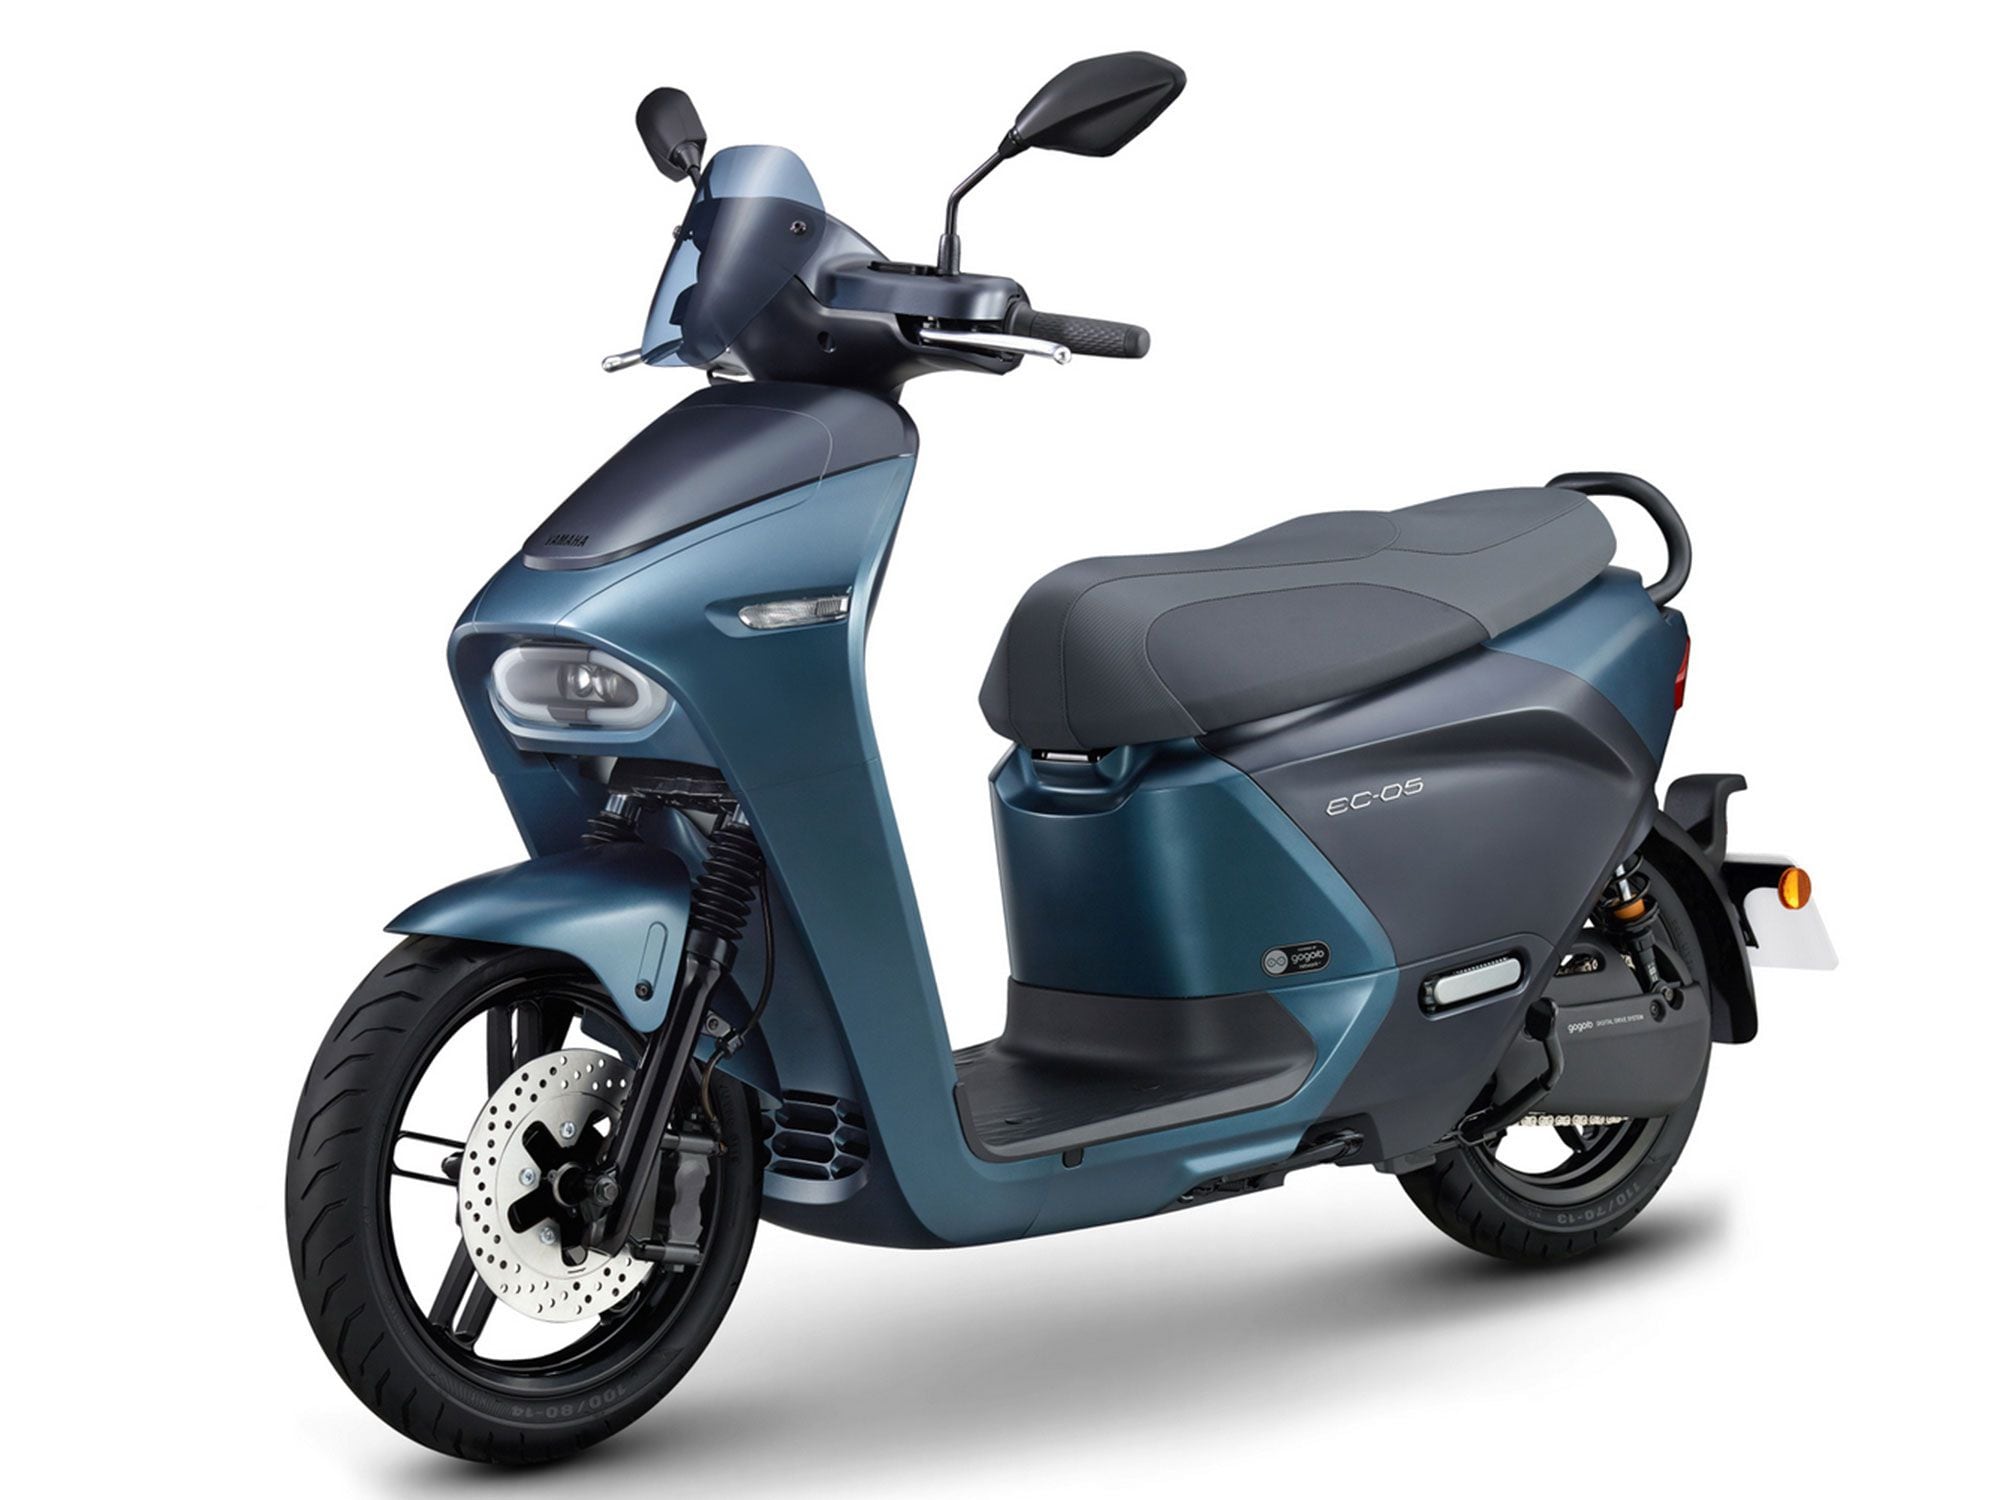 Yamaha’s EC-05 scooter already utilizes a swappable battery network based on a Gogoro design.